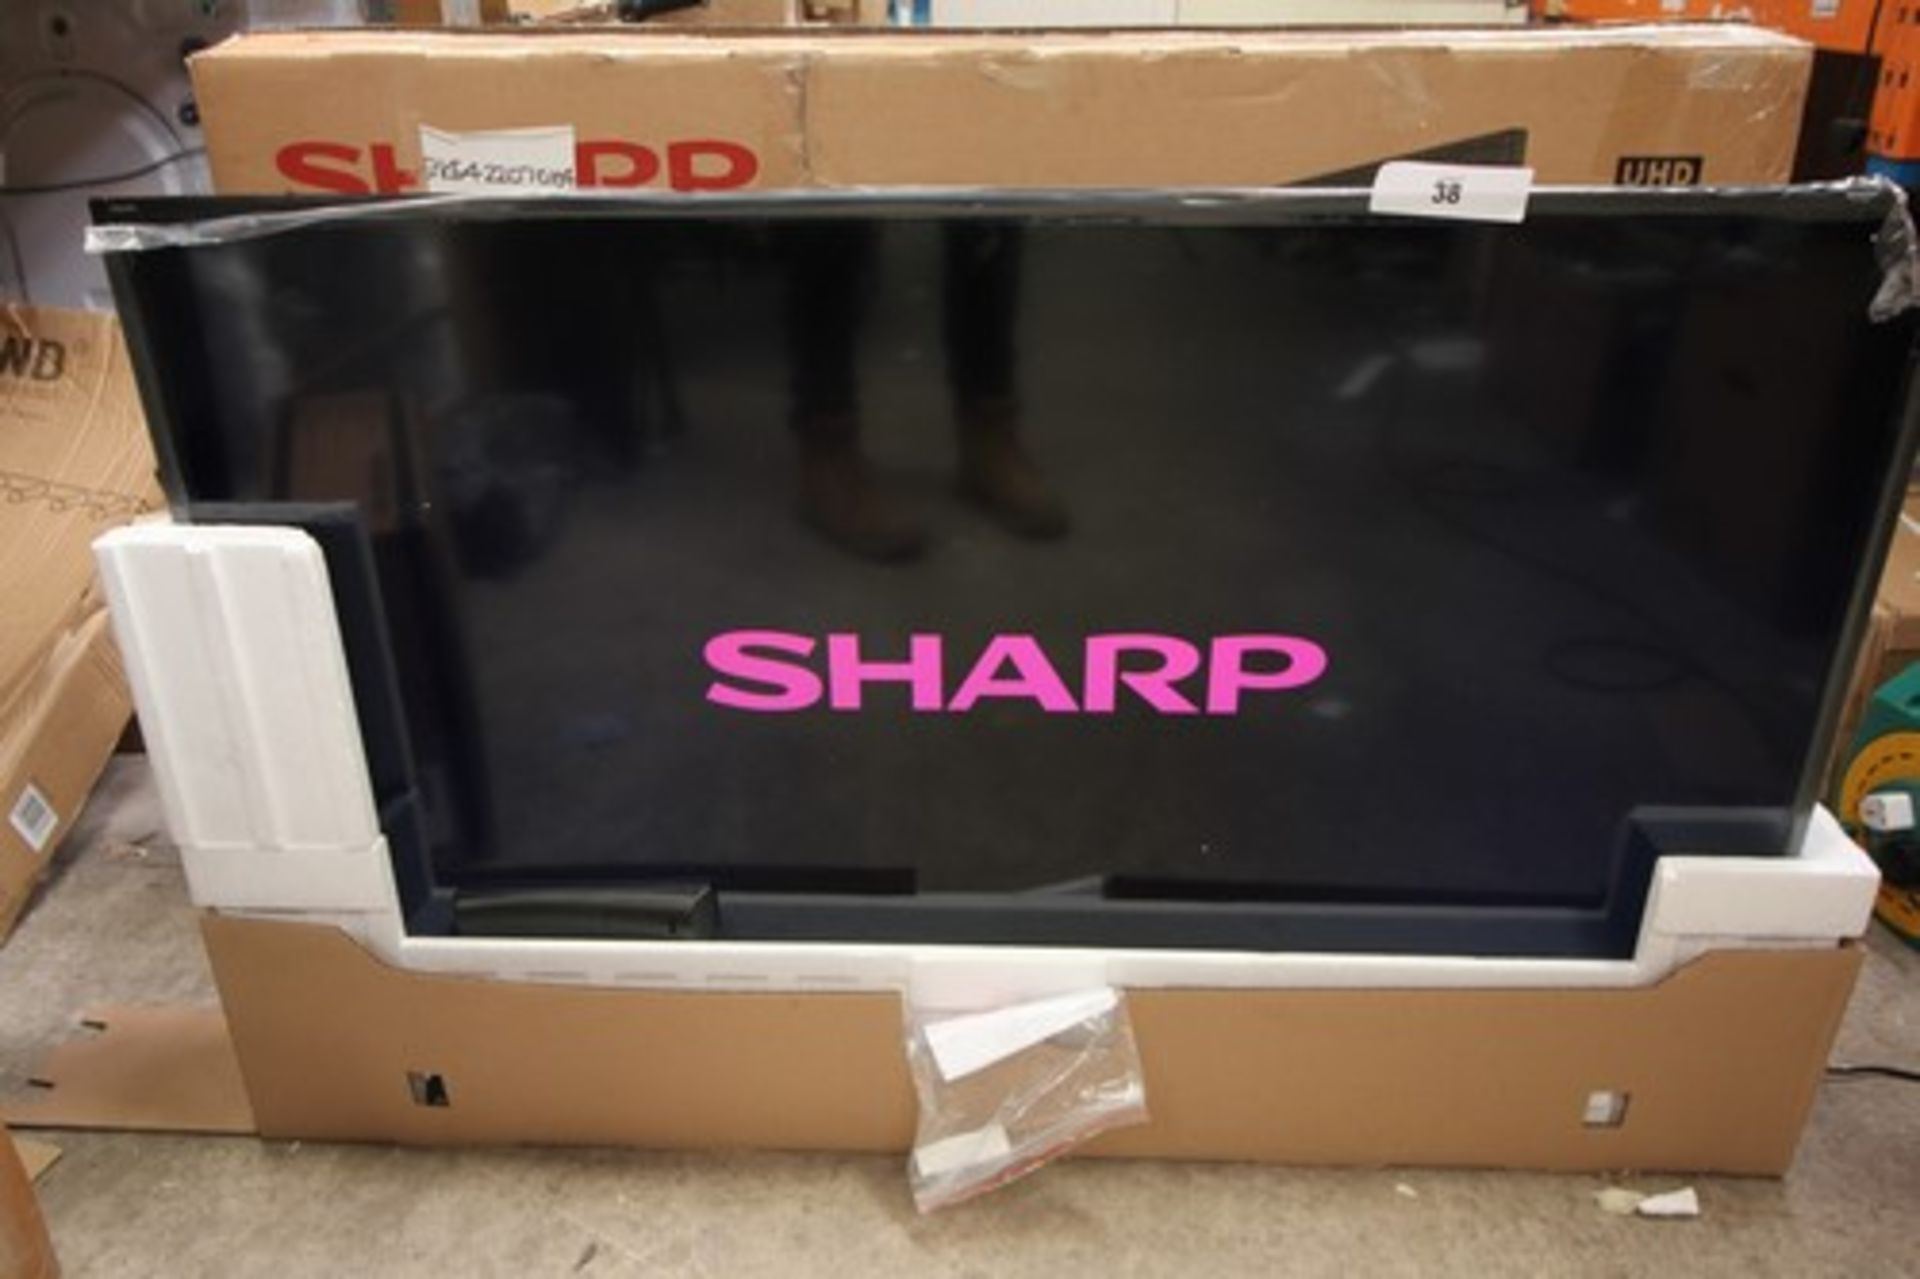 1 x Sharp 55" 4K TV with remote control, Model LC-55UI7352E, powers on but not fully tested - Second